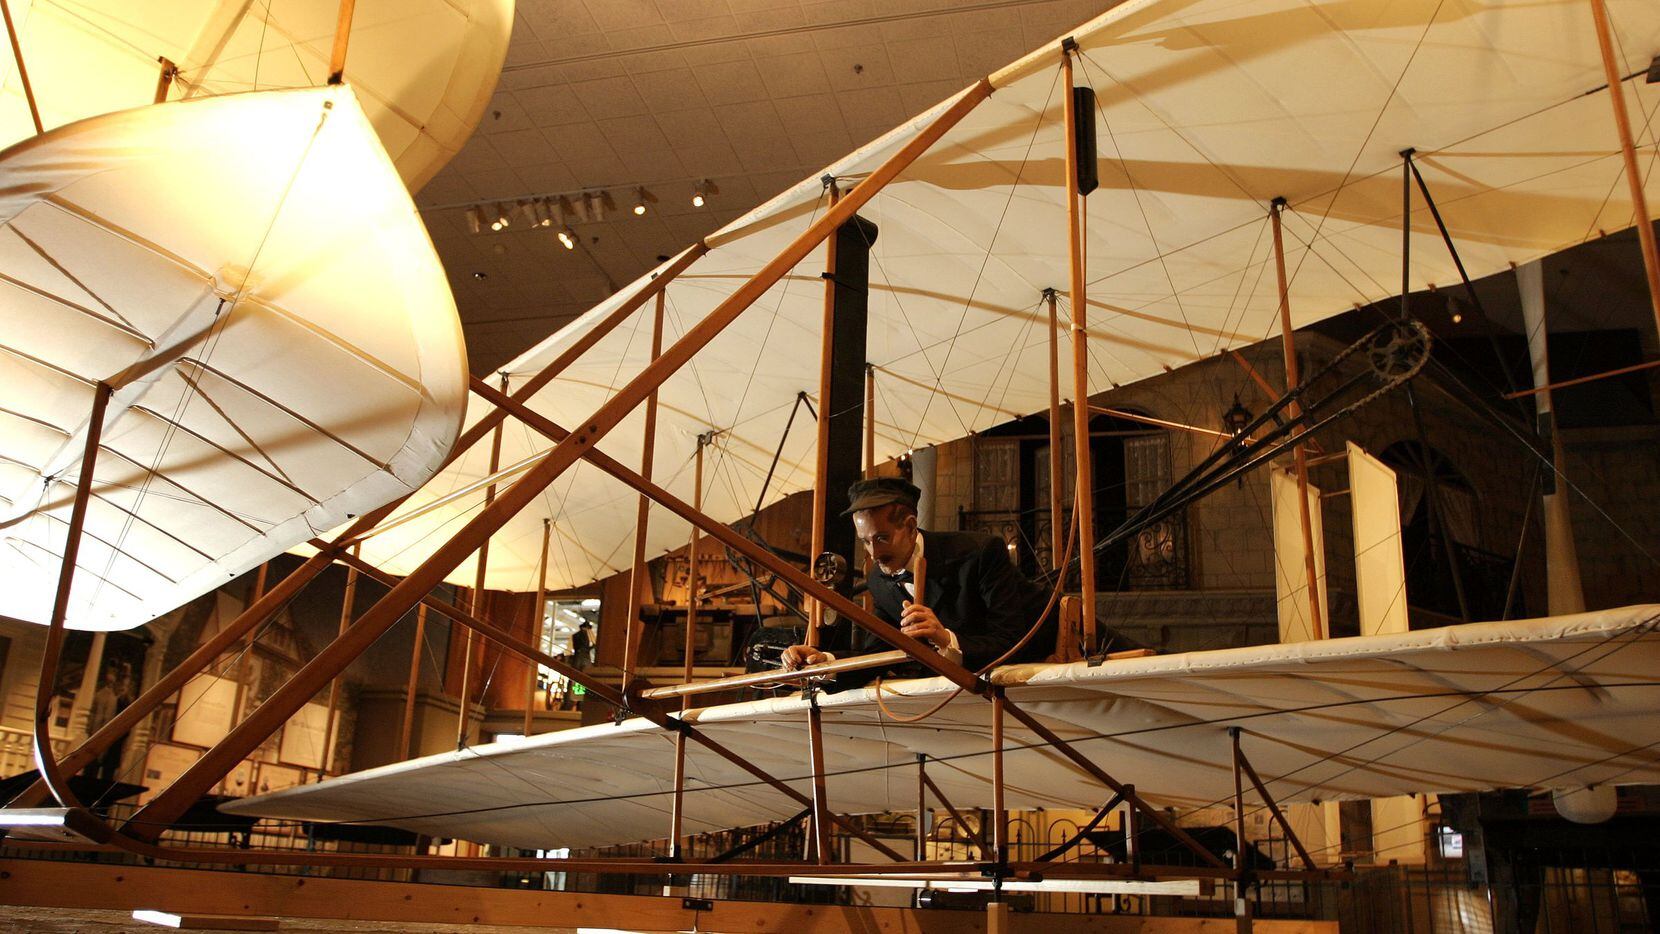 A likeness of Orville Wright lays at the controls in the Smithsonian Institution's National Air and Space Museum gallery exhibit "The Wright Brothers & The Invention of the Aerial Age." The exhibition featuring 170 artifacts, provides a look at the lives of Wilbur and Orville Wright, their technical achievements and their impact on the world.